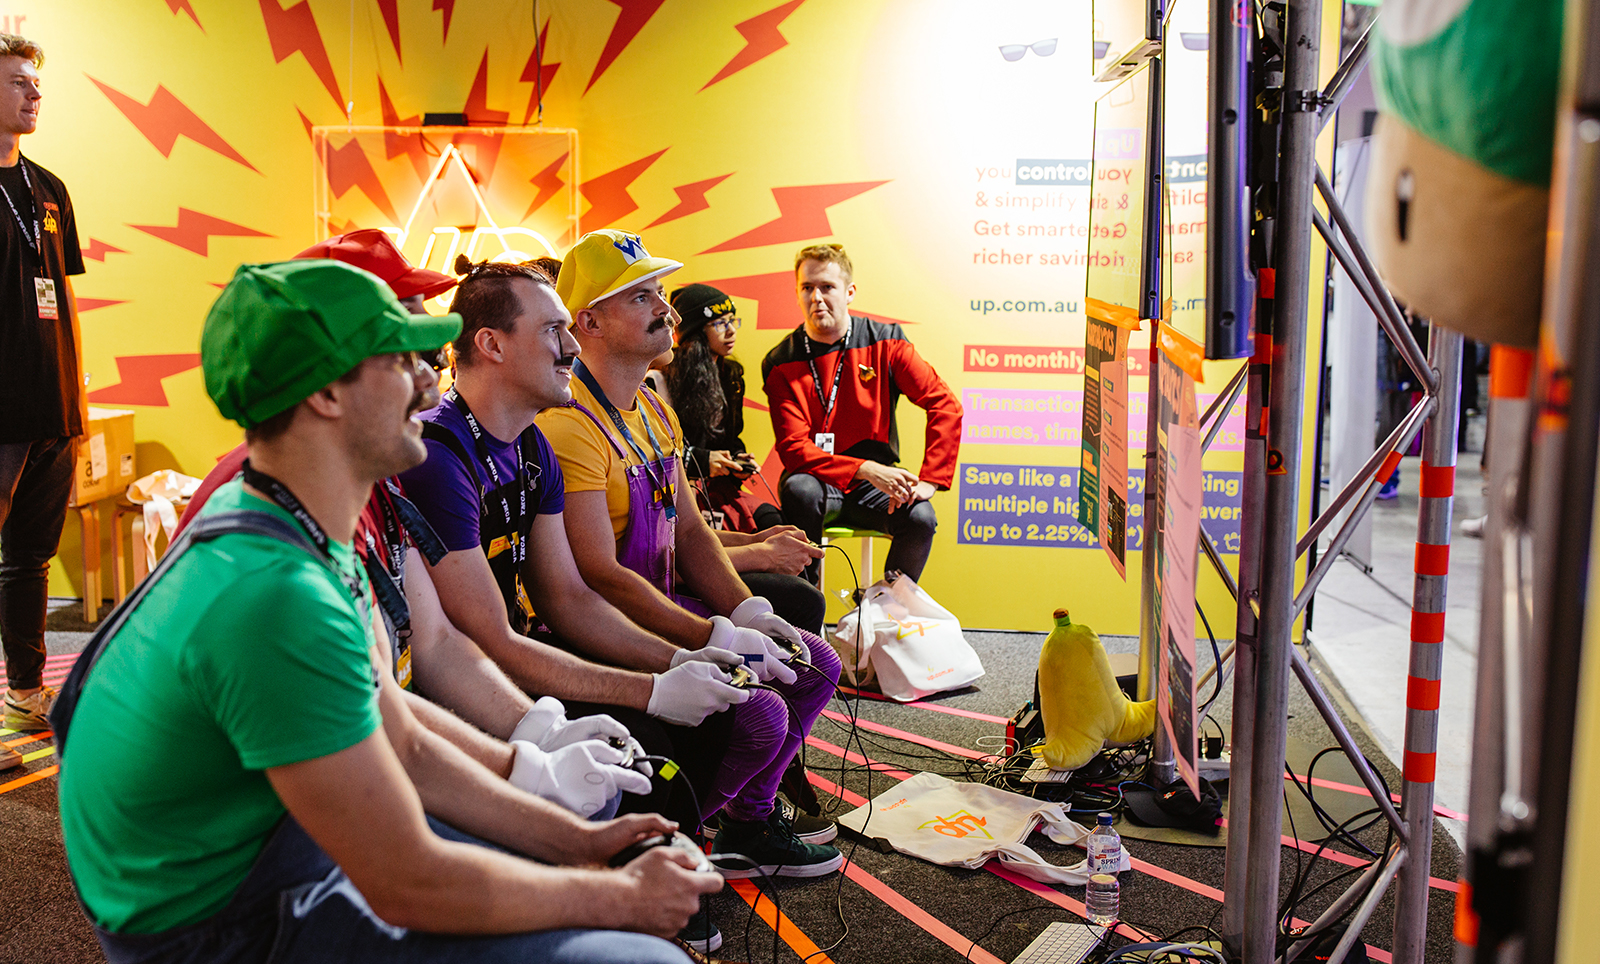 Mario fans gather to play Kart at the Up stand at PAX 2019